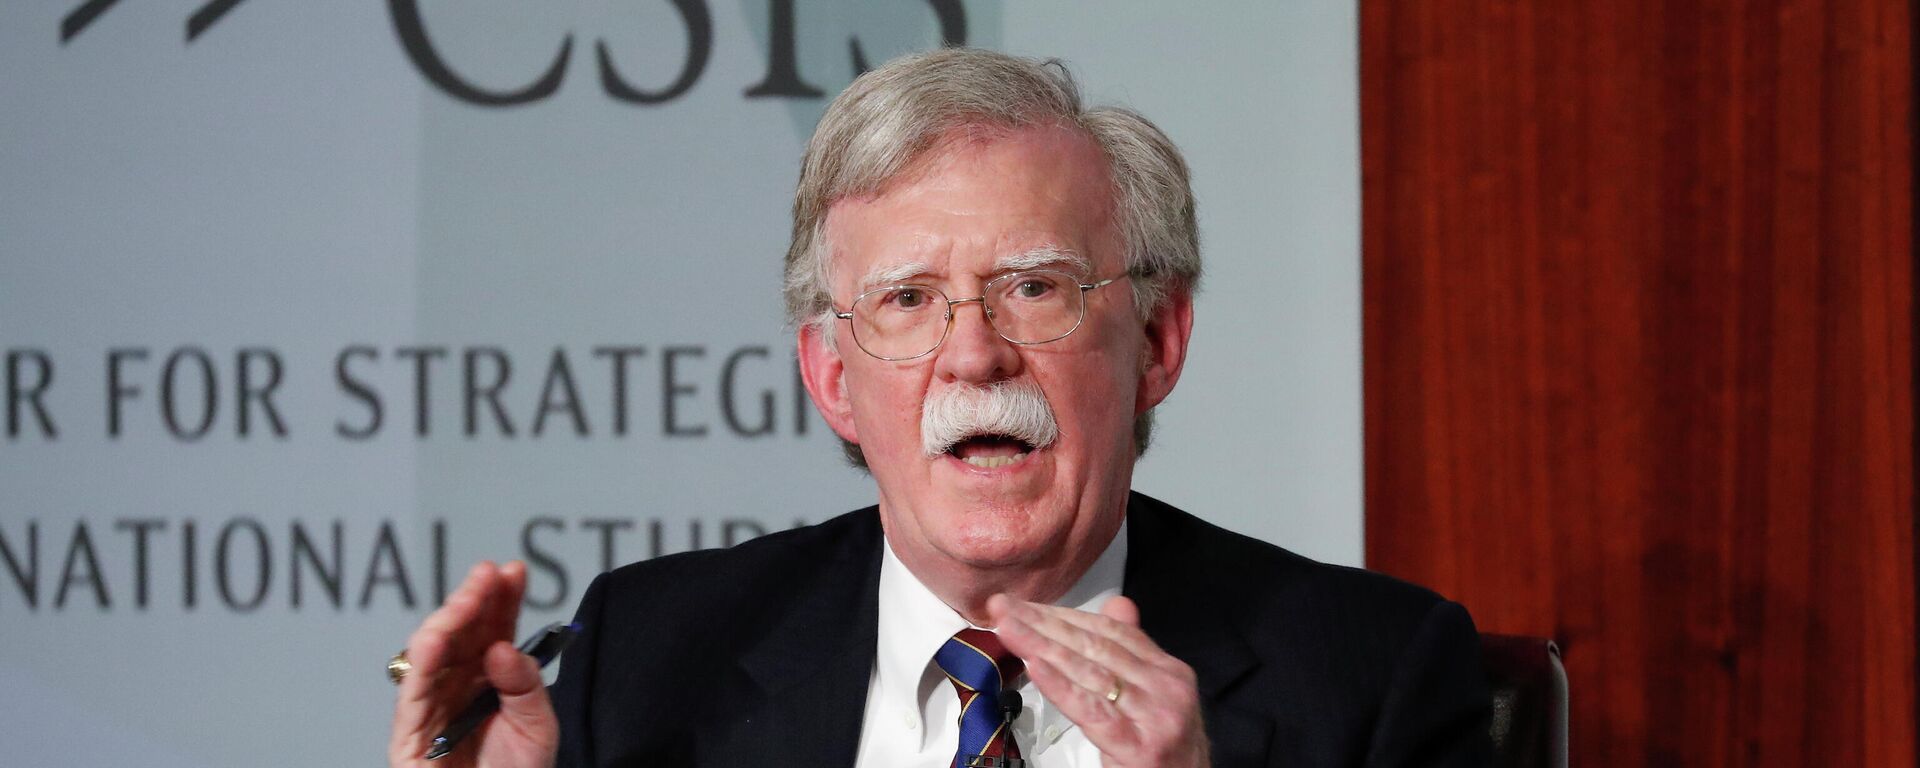 In this Sept. 30, 2019, file photo, former National security adviser John Bolton gestures while speakings at the Center for Strategic and International Studies in Washington. - Sputnik International, 1920, 26.11.2022